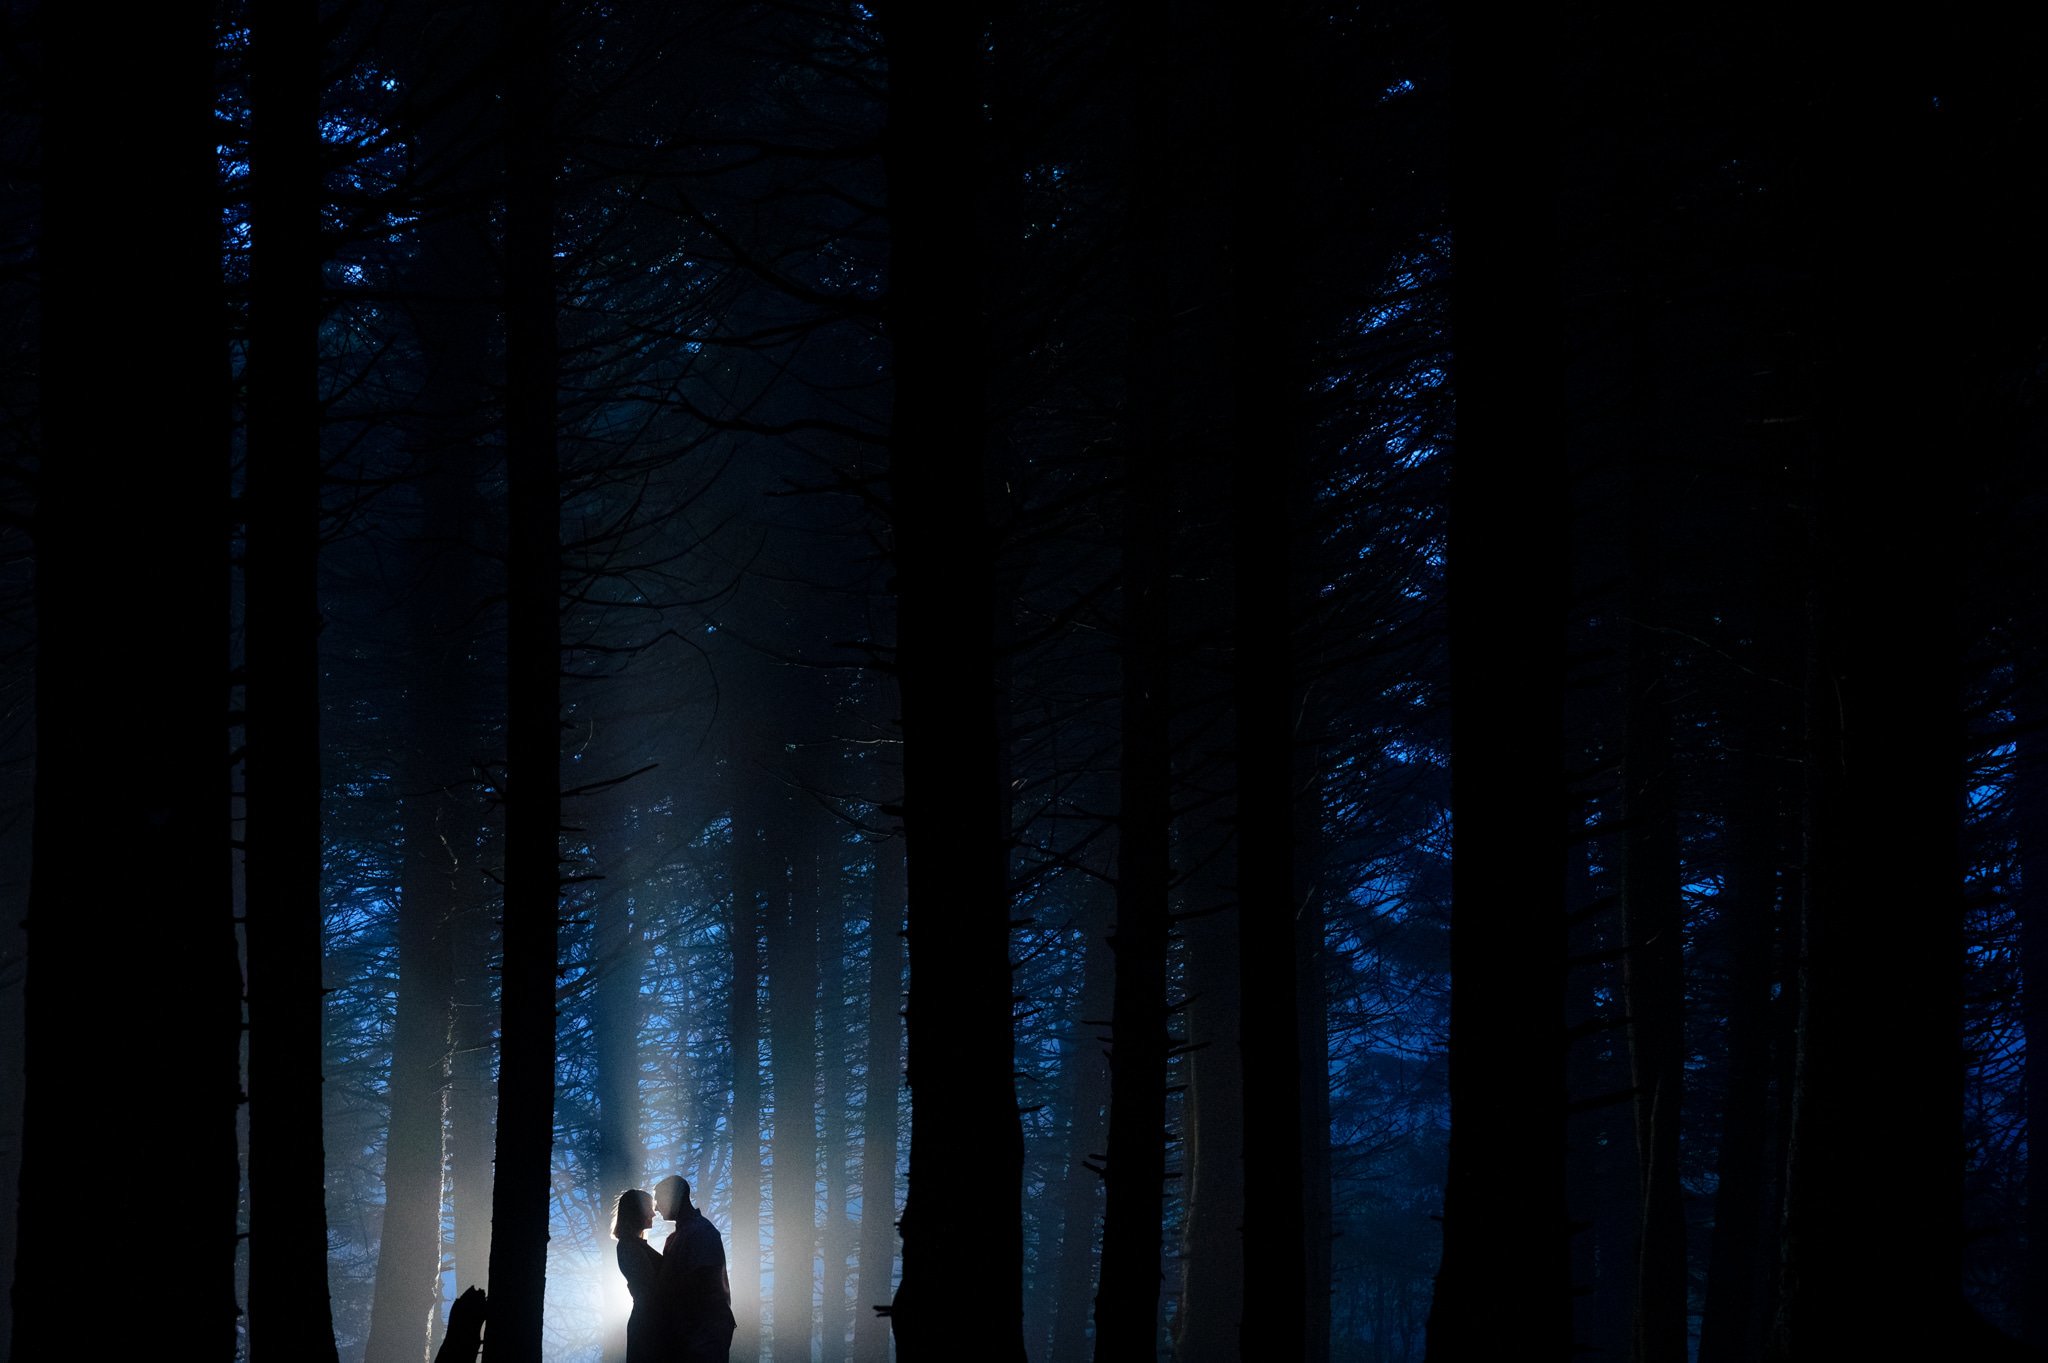 A man and woman standing in the woods at night captured by Asheville NC photographer, Michael Freas.